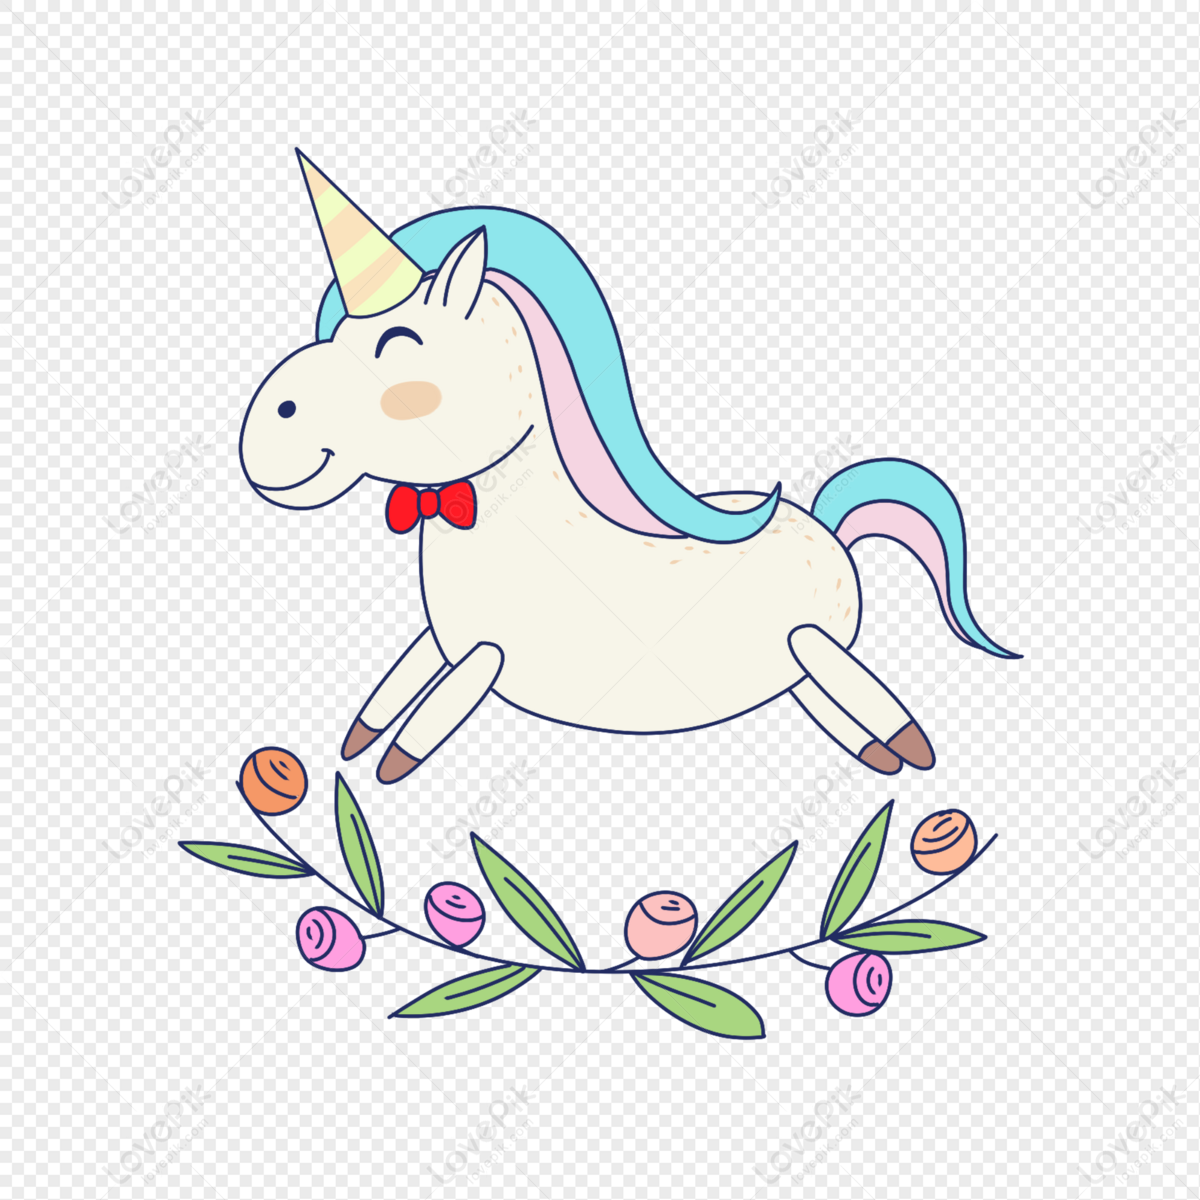 Unicorn Cartoon Garland PNG Transparent Background And Clipart Image For  Free Download - Lovepik | 401258720